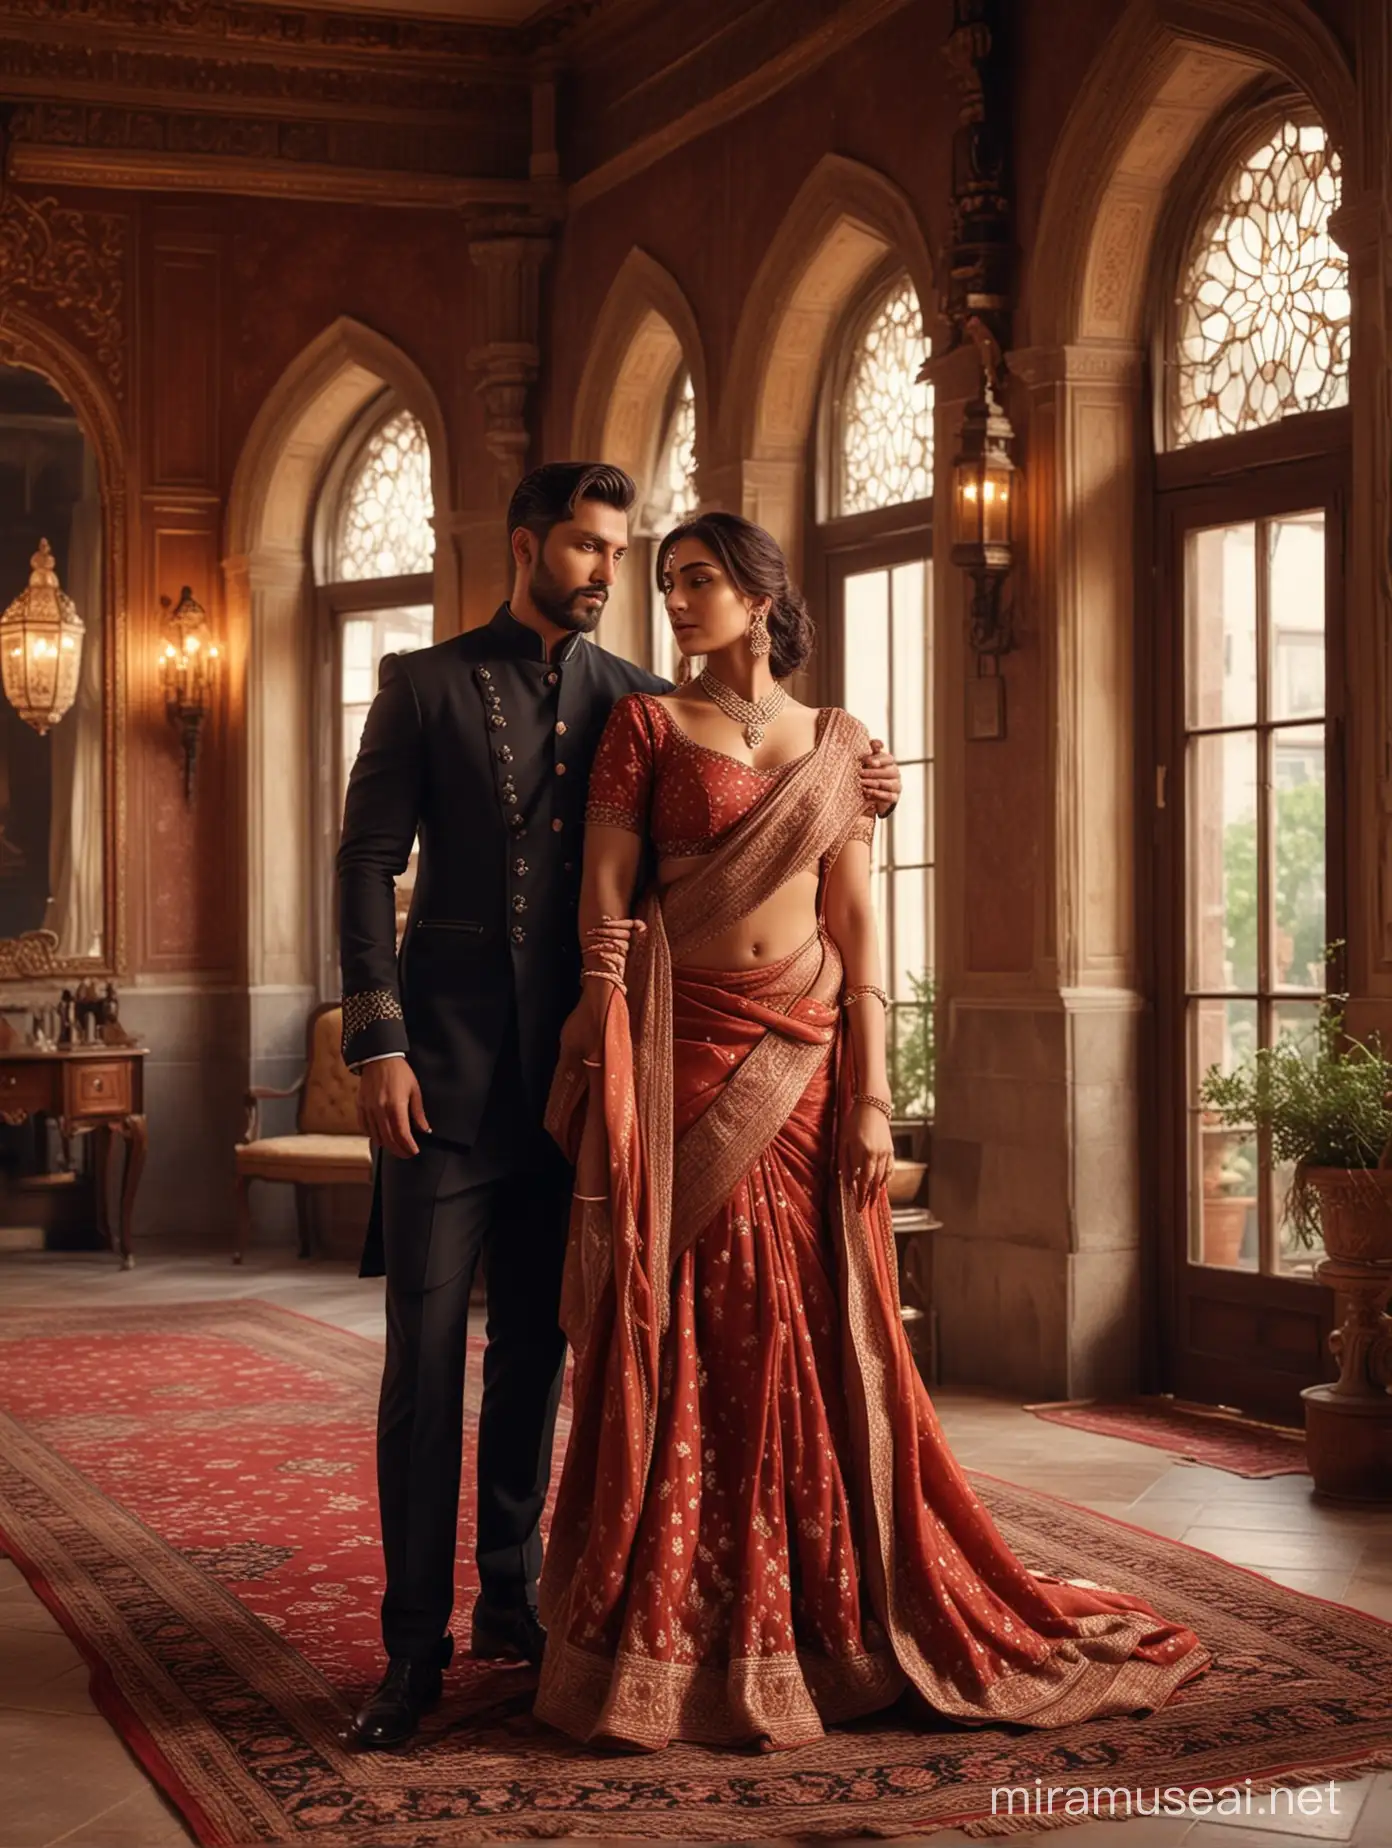 two intimate lovers,   european handsome mAn, most handsome european man with indian features, elegant and arrogant looks, alfa male, fashionable beard,  beard, alfa male, most beautiful indian girl, elegant saree look, low cut bacK
photo realistic, 4k.
background, vintage lamps, dimly  lit palace interior ambiance, BRICK RED  color carpet, interior designs, big window for outside view, romantic atmosphere, intricate details, 8k.